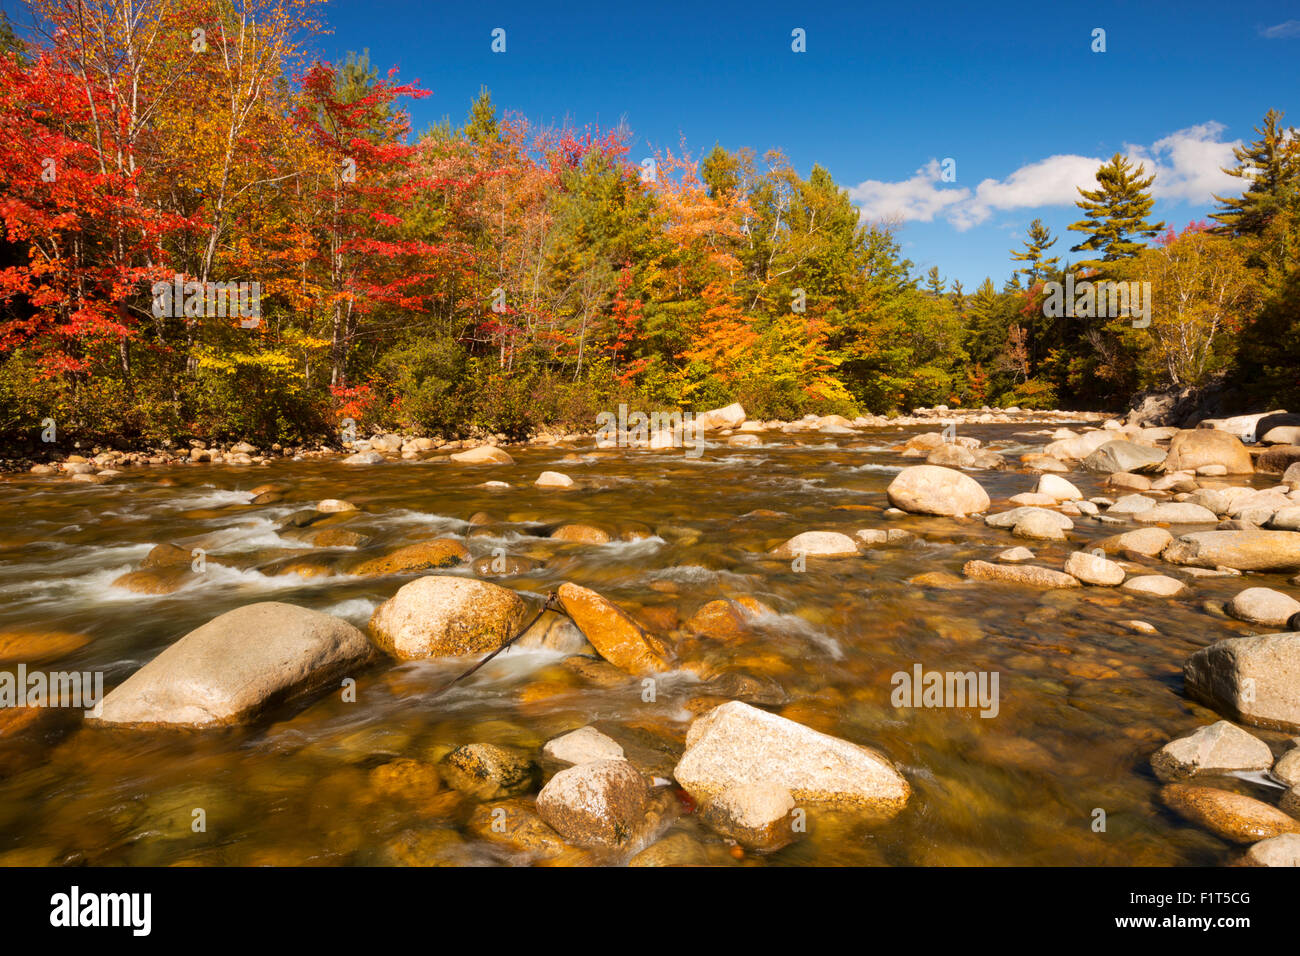 Multi-coloured fall foliage along a river. Photographed at the Swift River, White Mountain National Forest in New Hampshire, USA Stock Photo